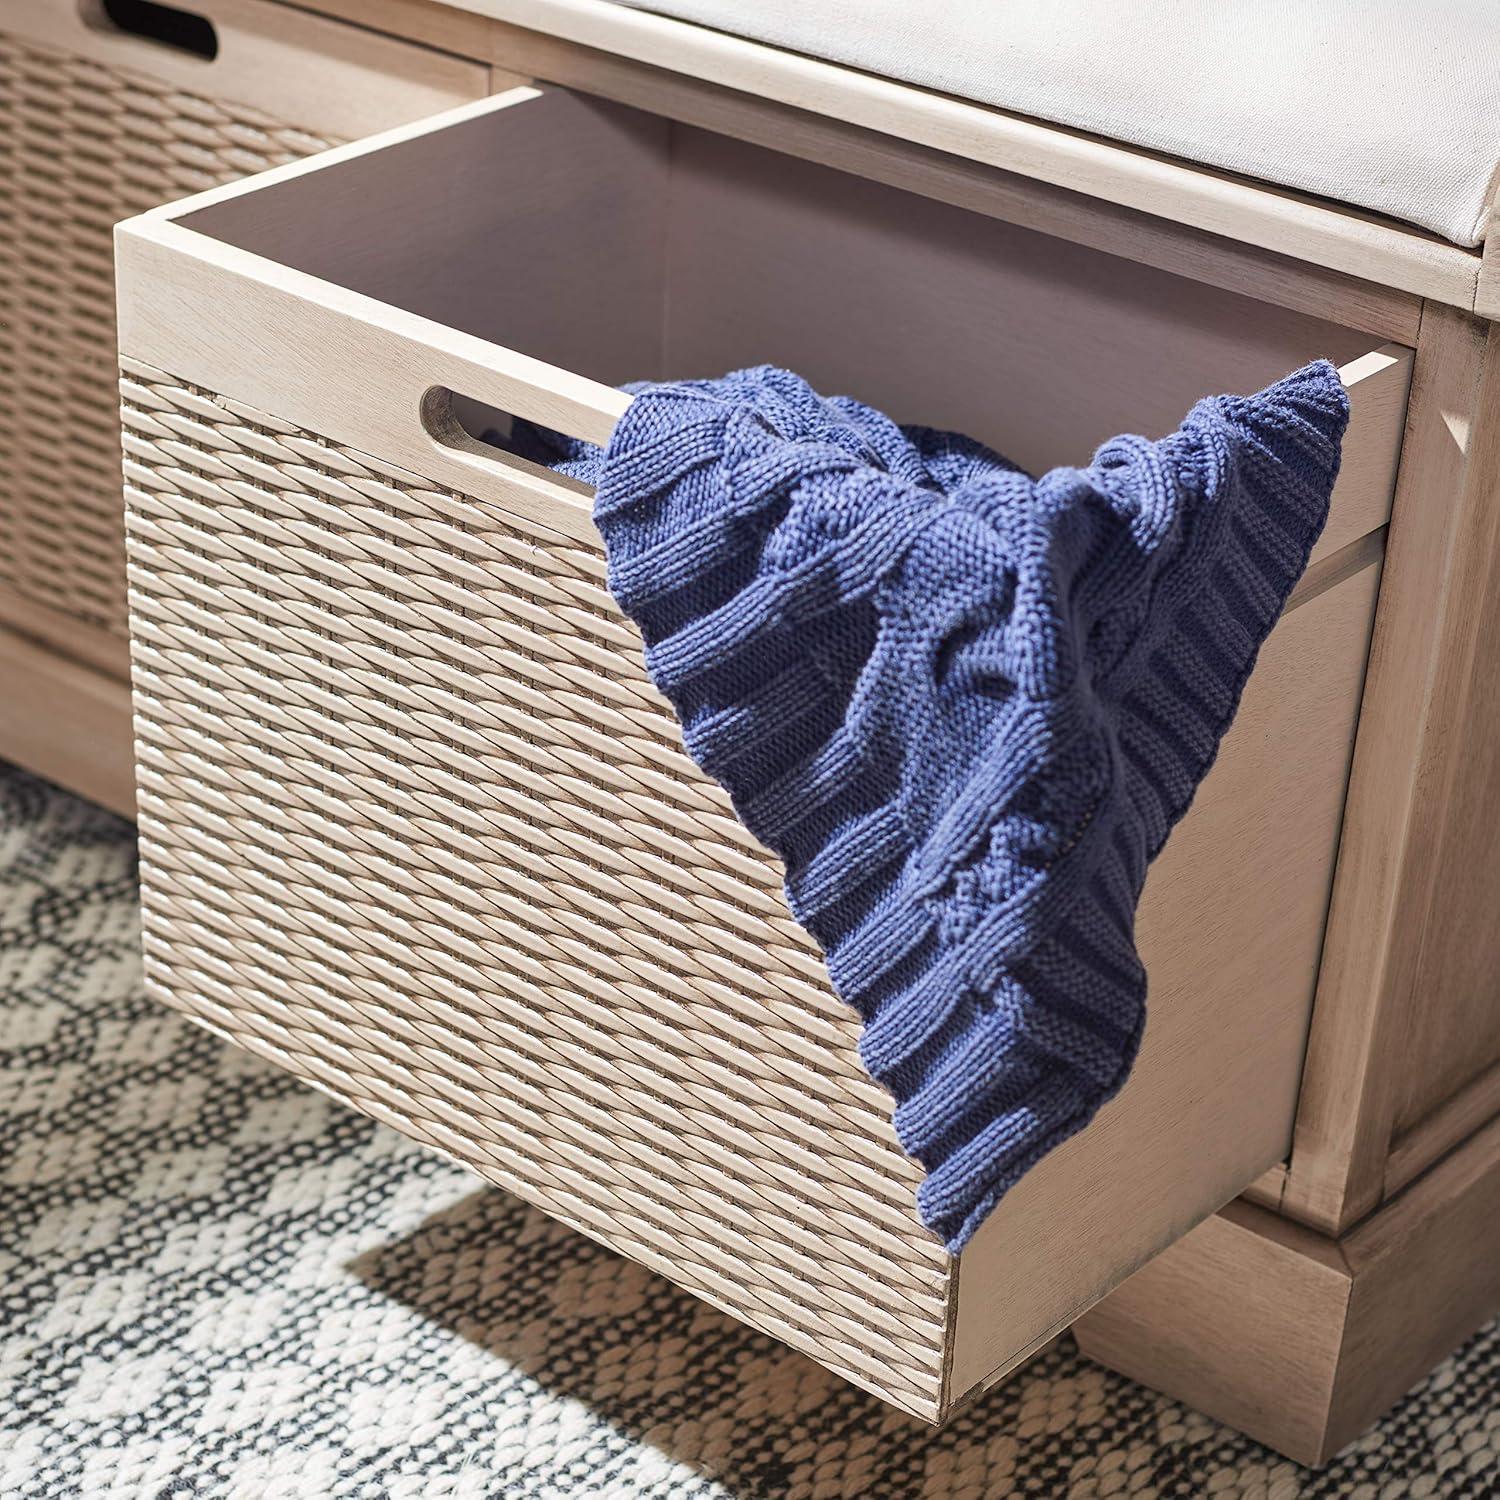 Landers Sand Cushioned Storage Bench with Dual Basket Drawers